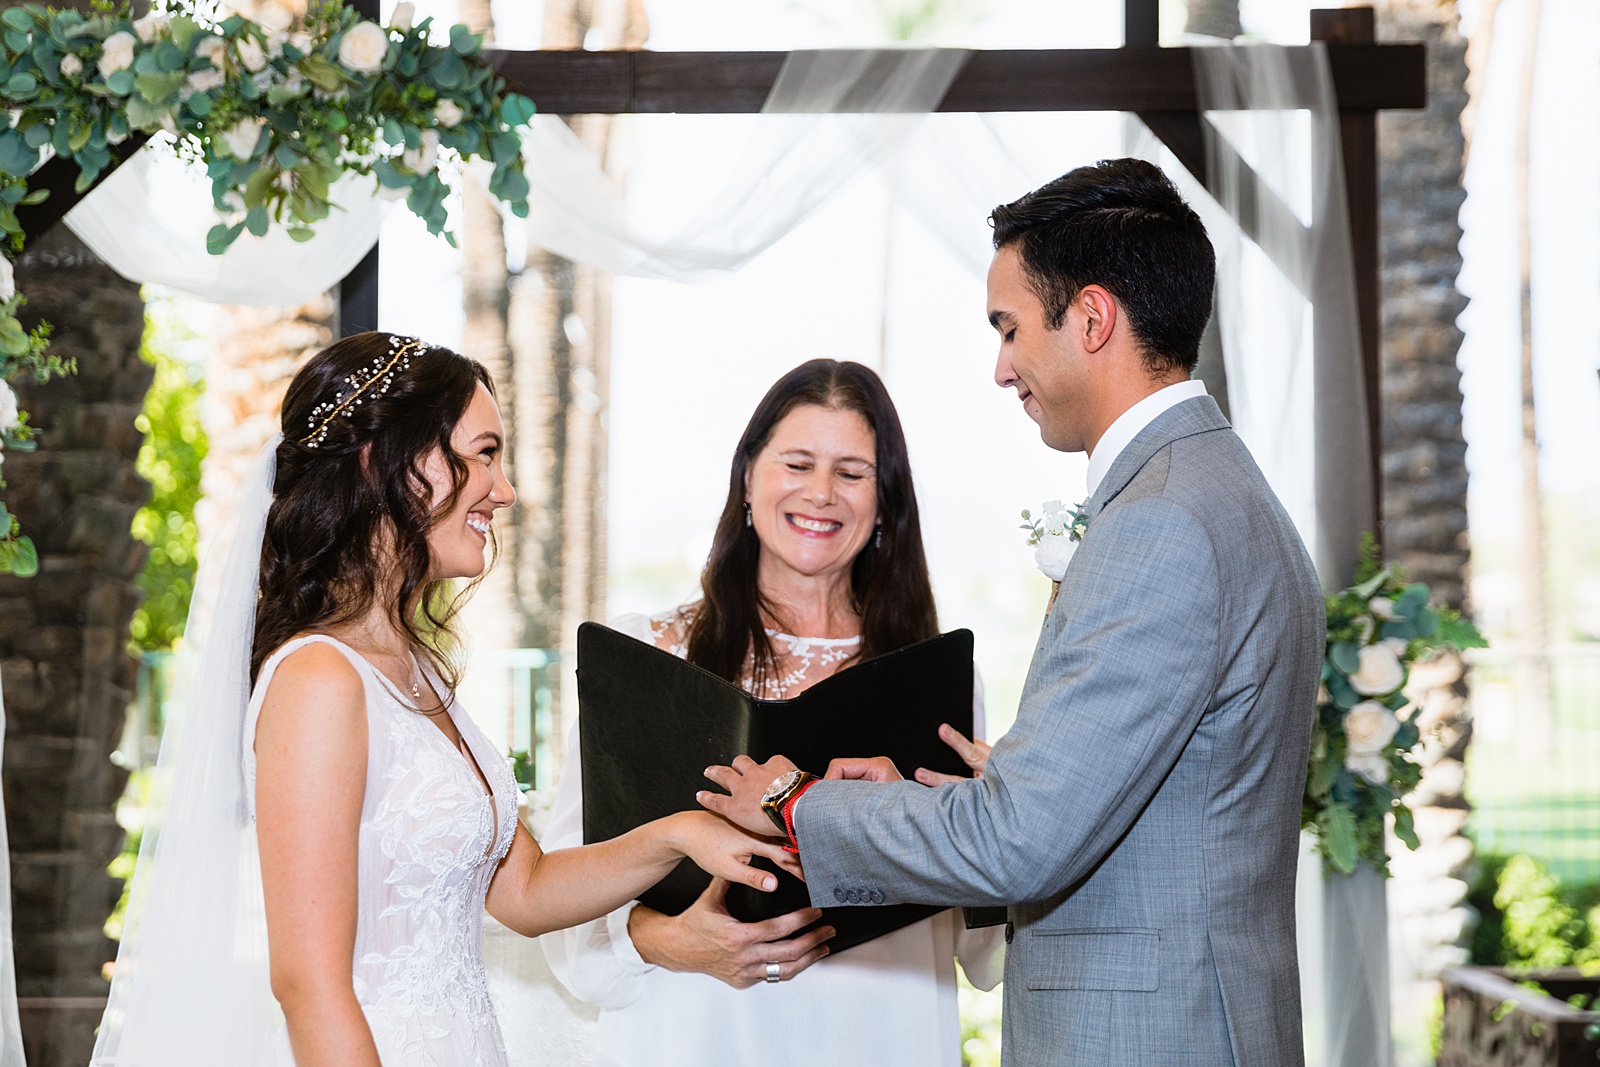 Bride and groom exchange rings during their wedding ceremony at Hyatt Regency Scottsdale Resort & Spa At Gainey Ranch by Phoenix wedding photographer PMA Photography.